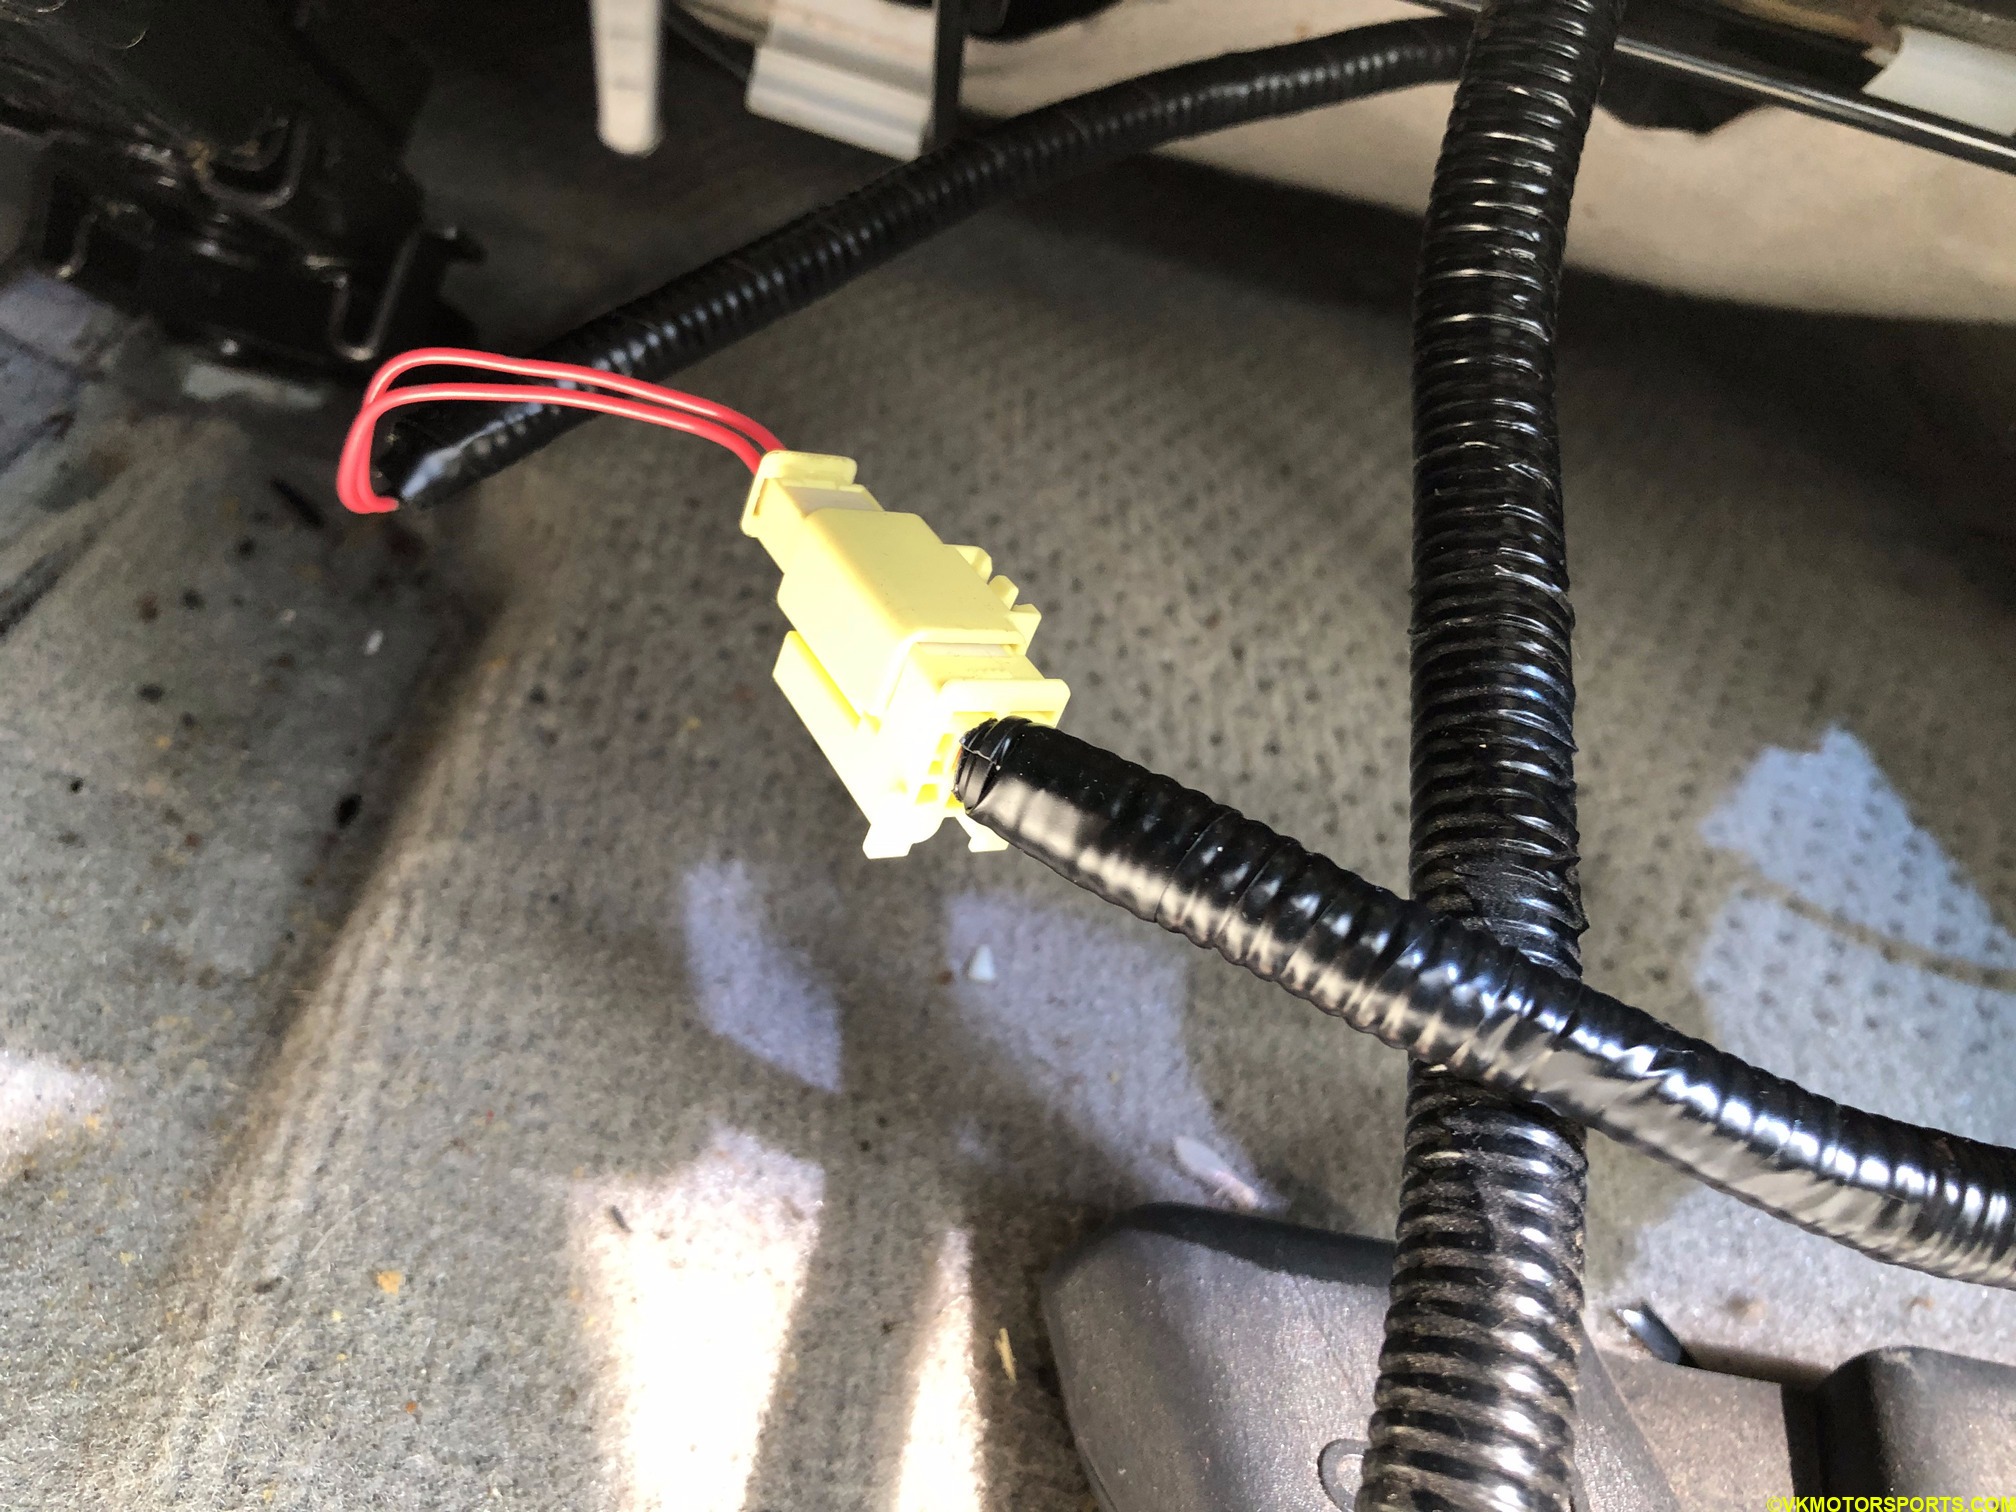 Figure 2. Locate the yellow airbag connector on the wiring harness